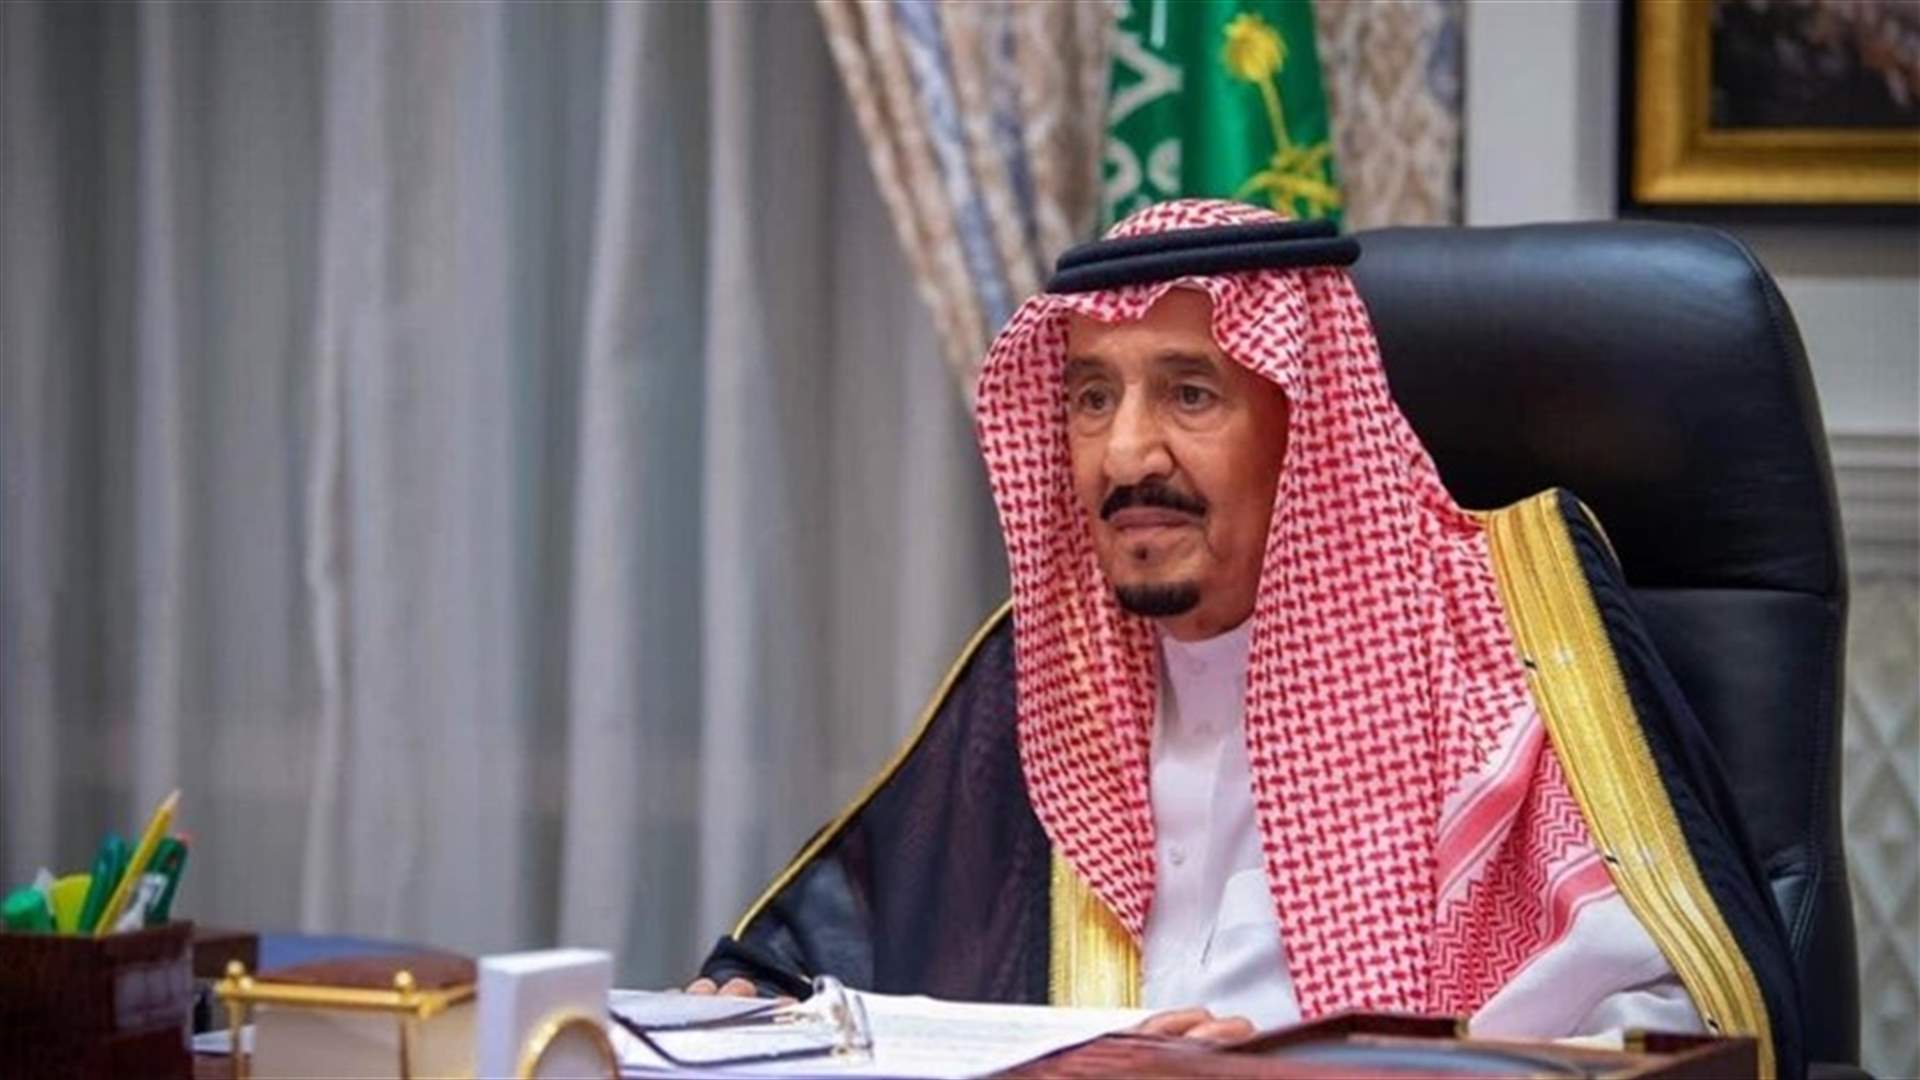 King salman discharged from hospital after medical examinations